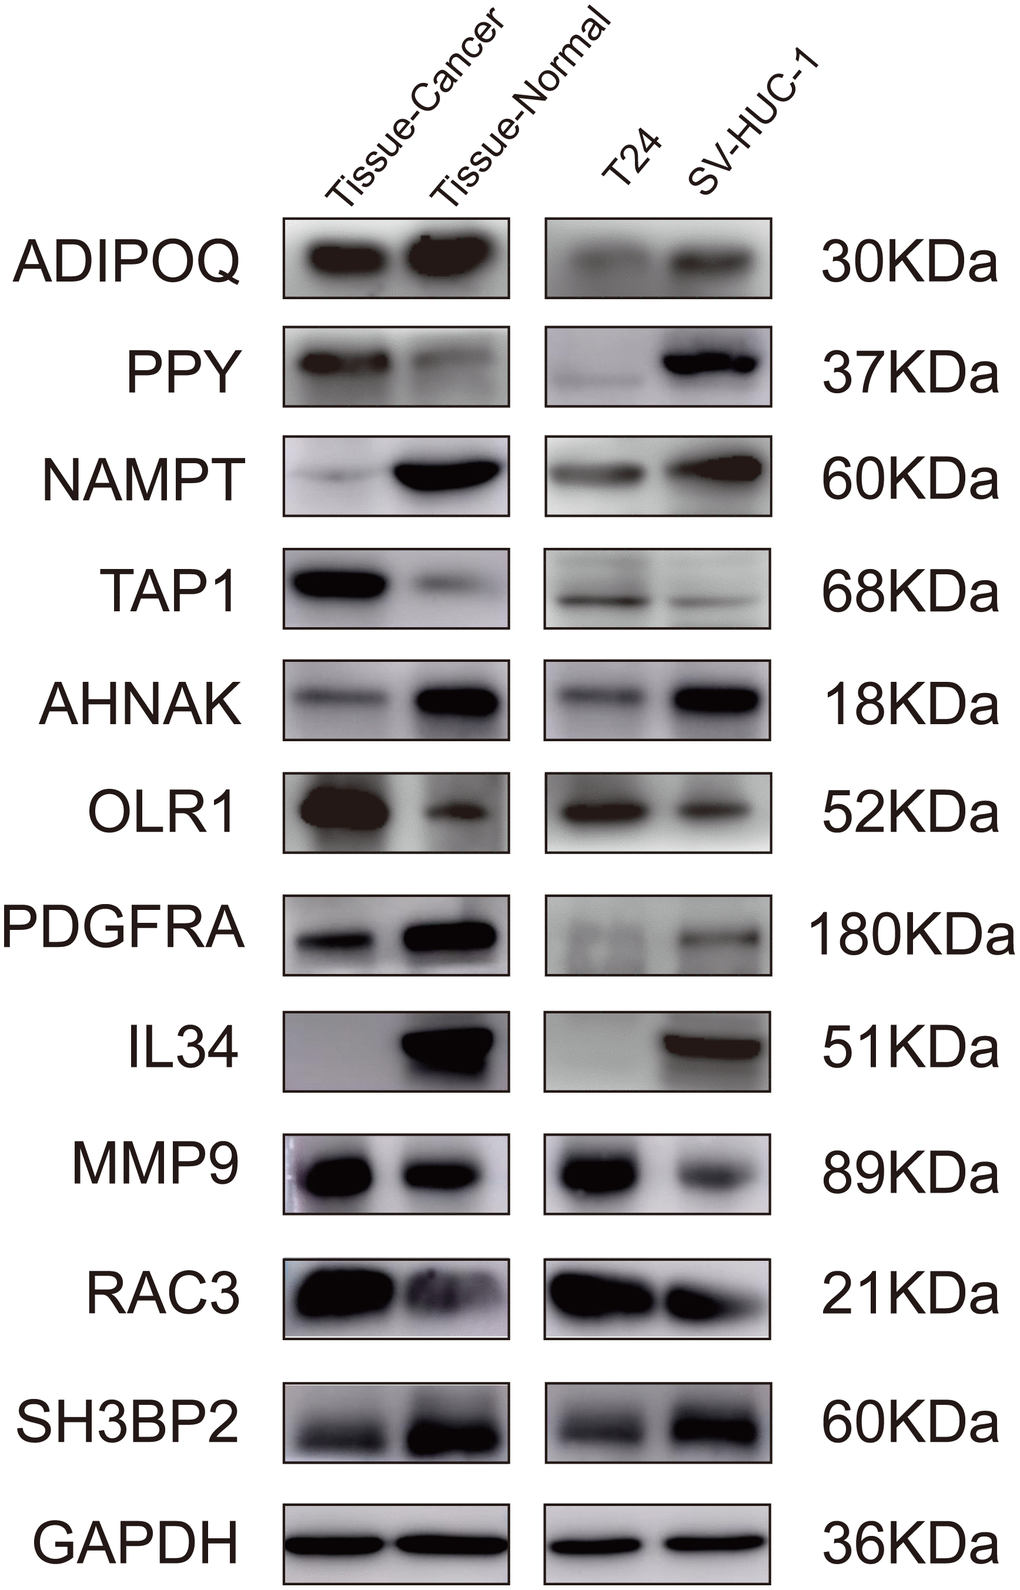 Validation of the IRGs by western blot. Validation of the IRGs by western blot on bladder cancer tissues and adjacent tissues, human normal bladder epithelial cells (SV-HUC-1), and a bladder cancer cell line (T24).